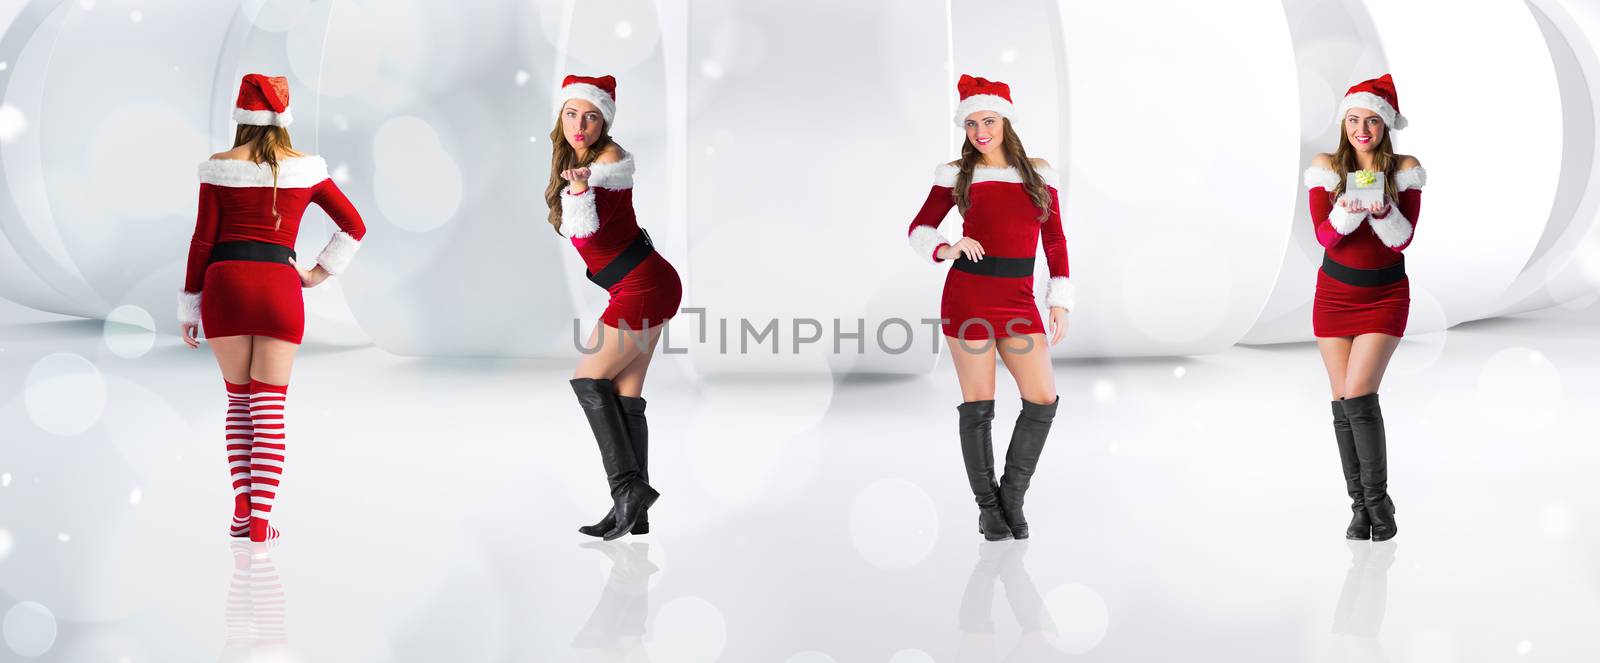 Composite image of different festive blondes by Wavebreakmedia